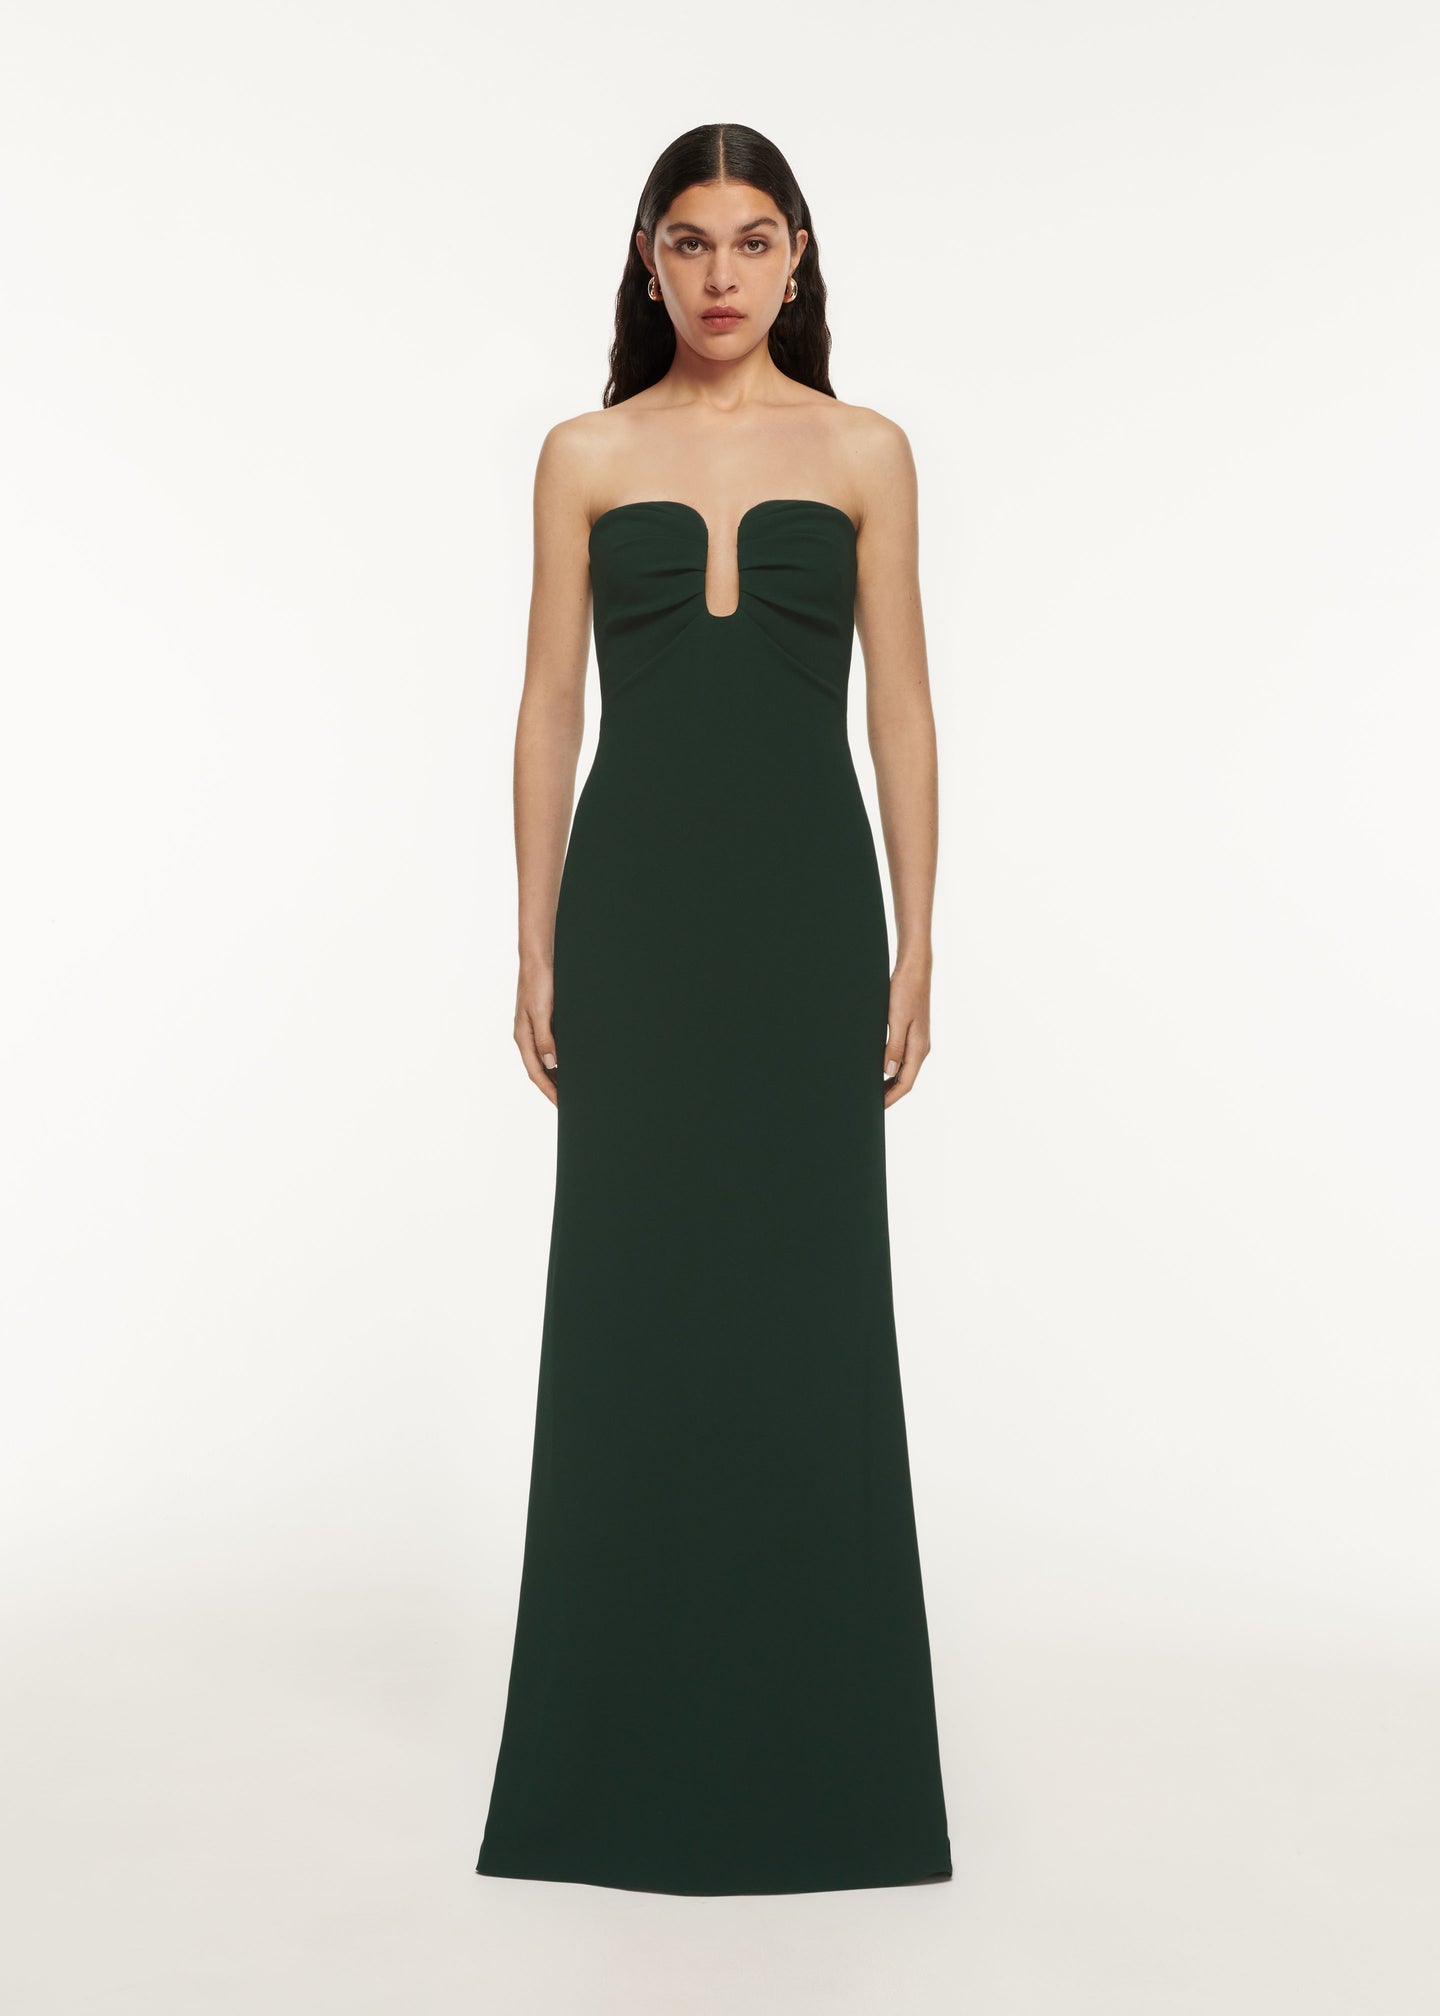 A woman wearing the Strapless Satin Crepe Gown Green